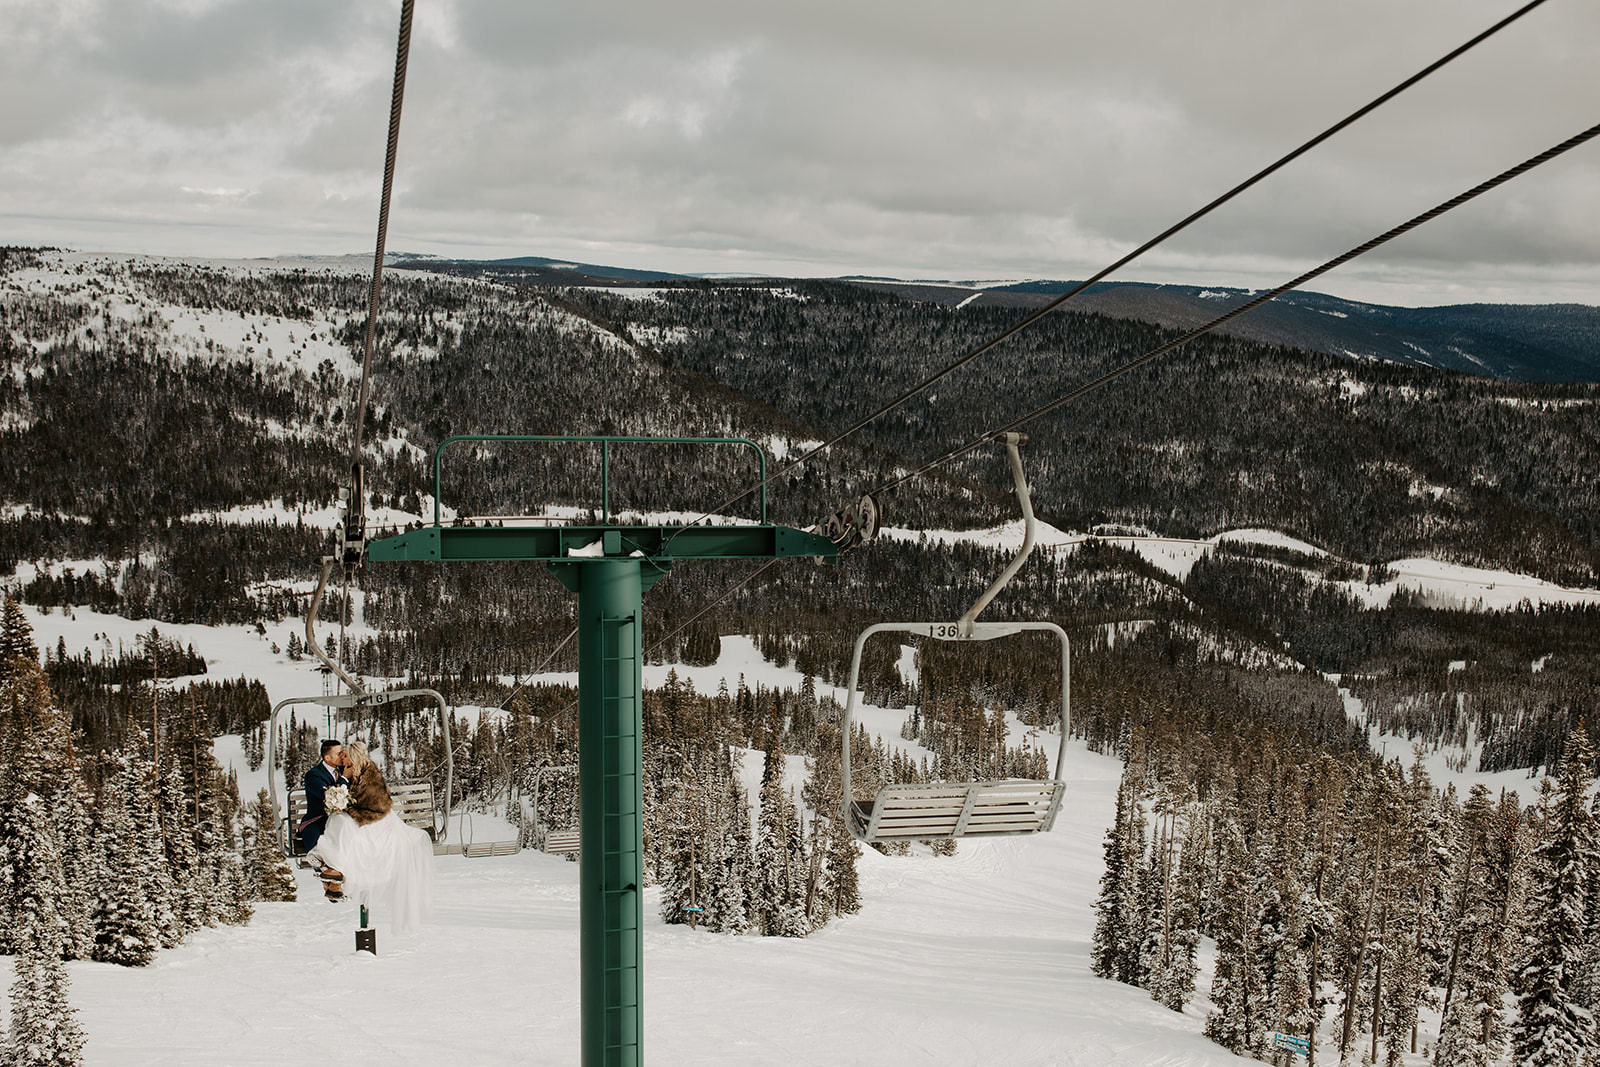 Adylee and Tyler on a ski lift during their elopement photos at Showdown in Central Montana.